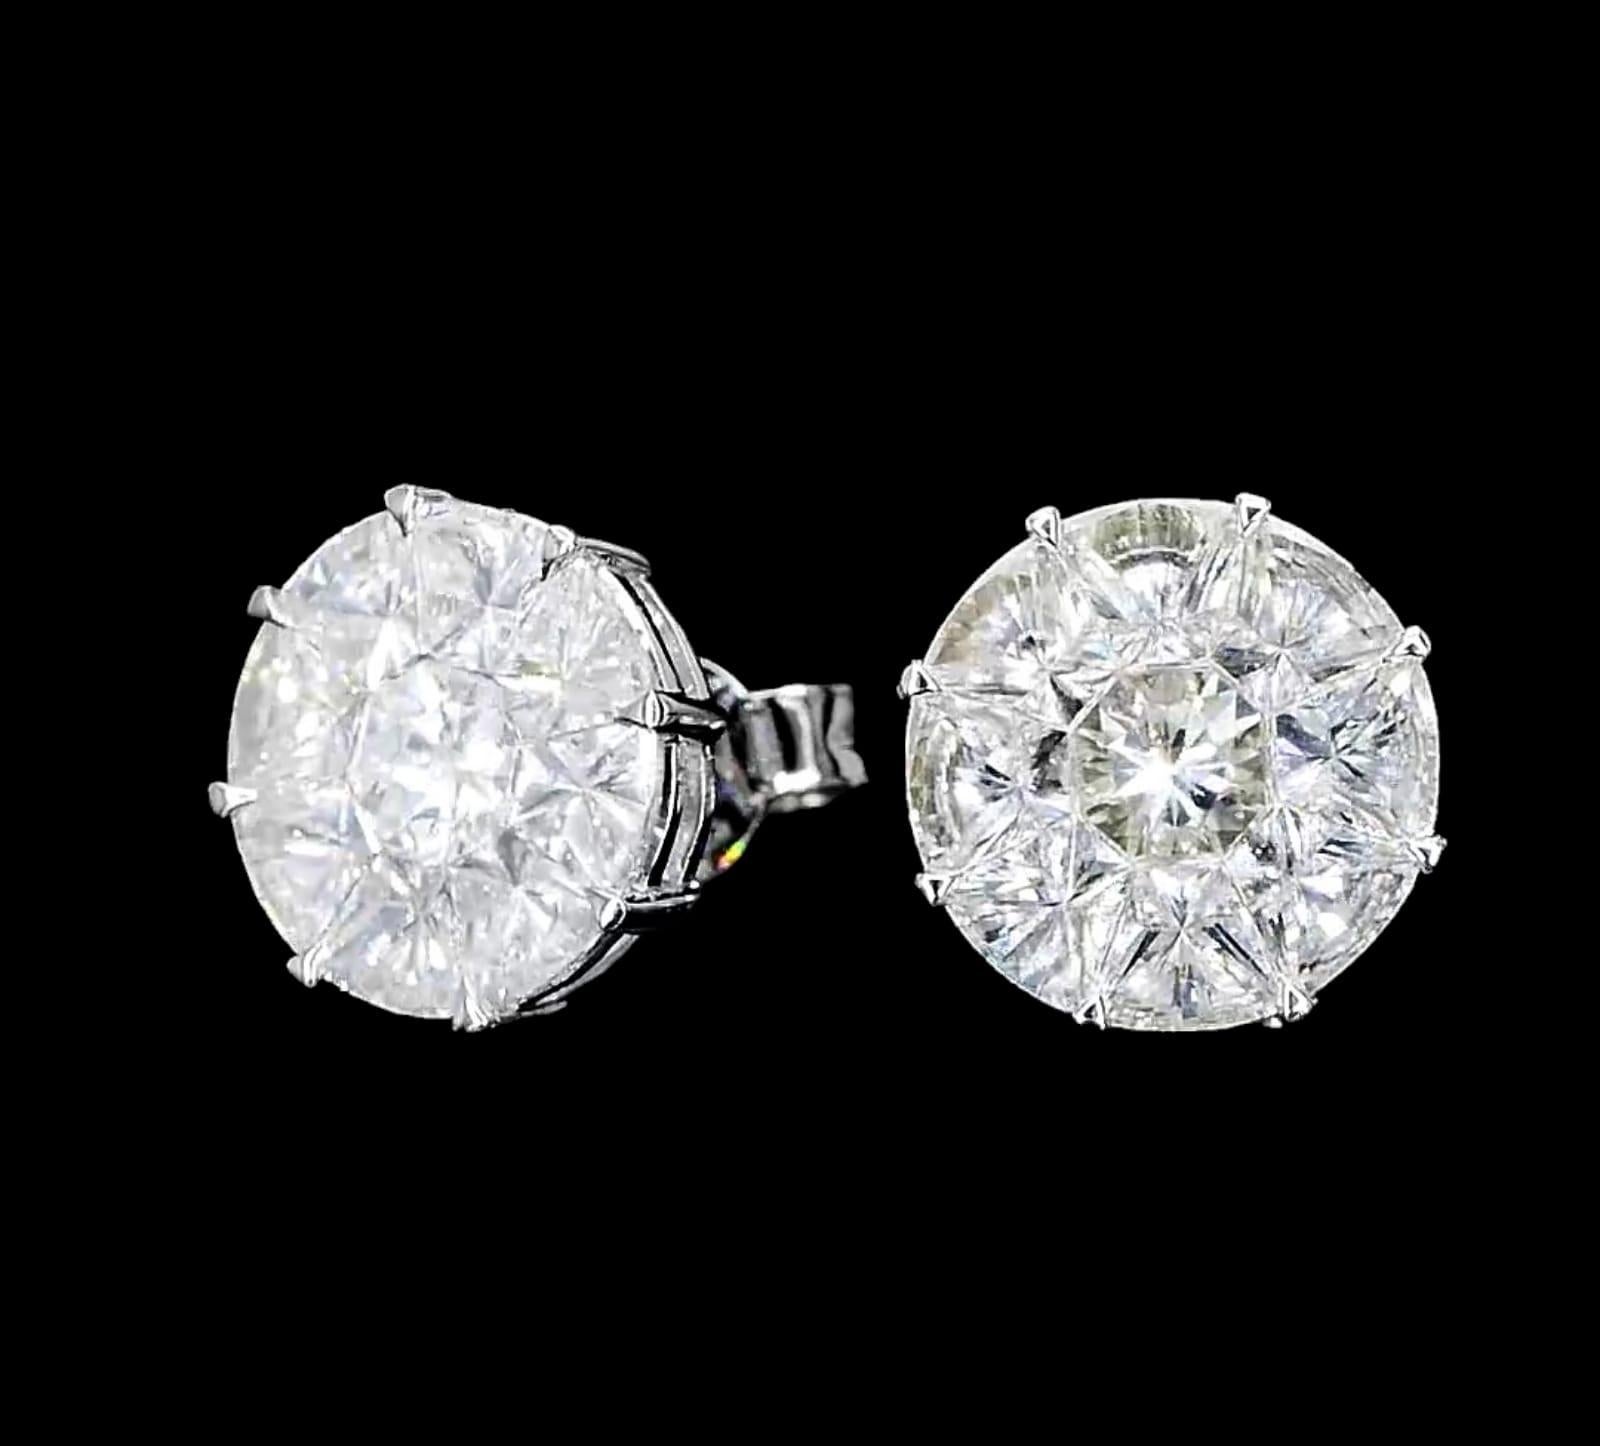 **100% NATURAL FANCY COLOUR DIAMOND JEWELRY**

✪ Jewelry Details ✪

♦ MAIN STONE DETAILS

➛ Stone Shape: Round
➛ Stone Weight: 18 pcs – 3.27 cts

♦ GROSS WEIGHT: 3.69 grams

➛ Metal Type: 18k White Gold
➛ Jewelry Type: Diamond earrings, Stud